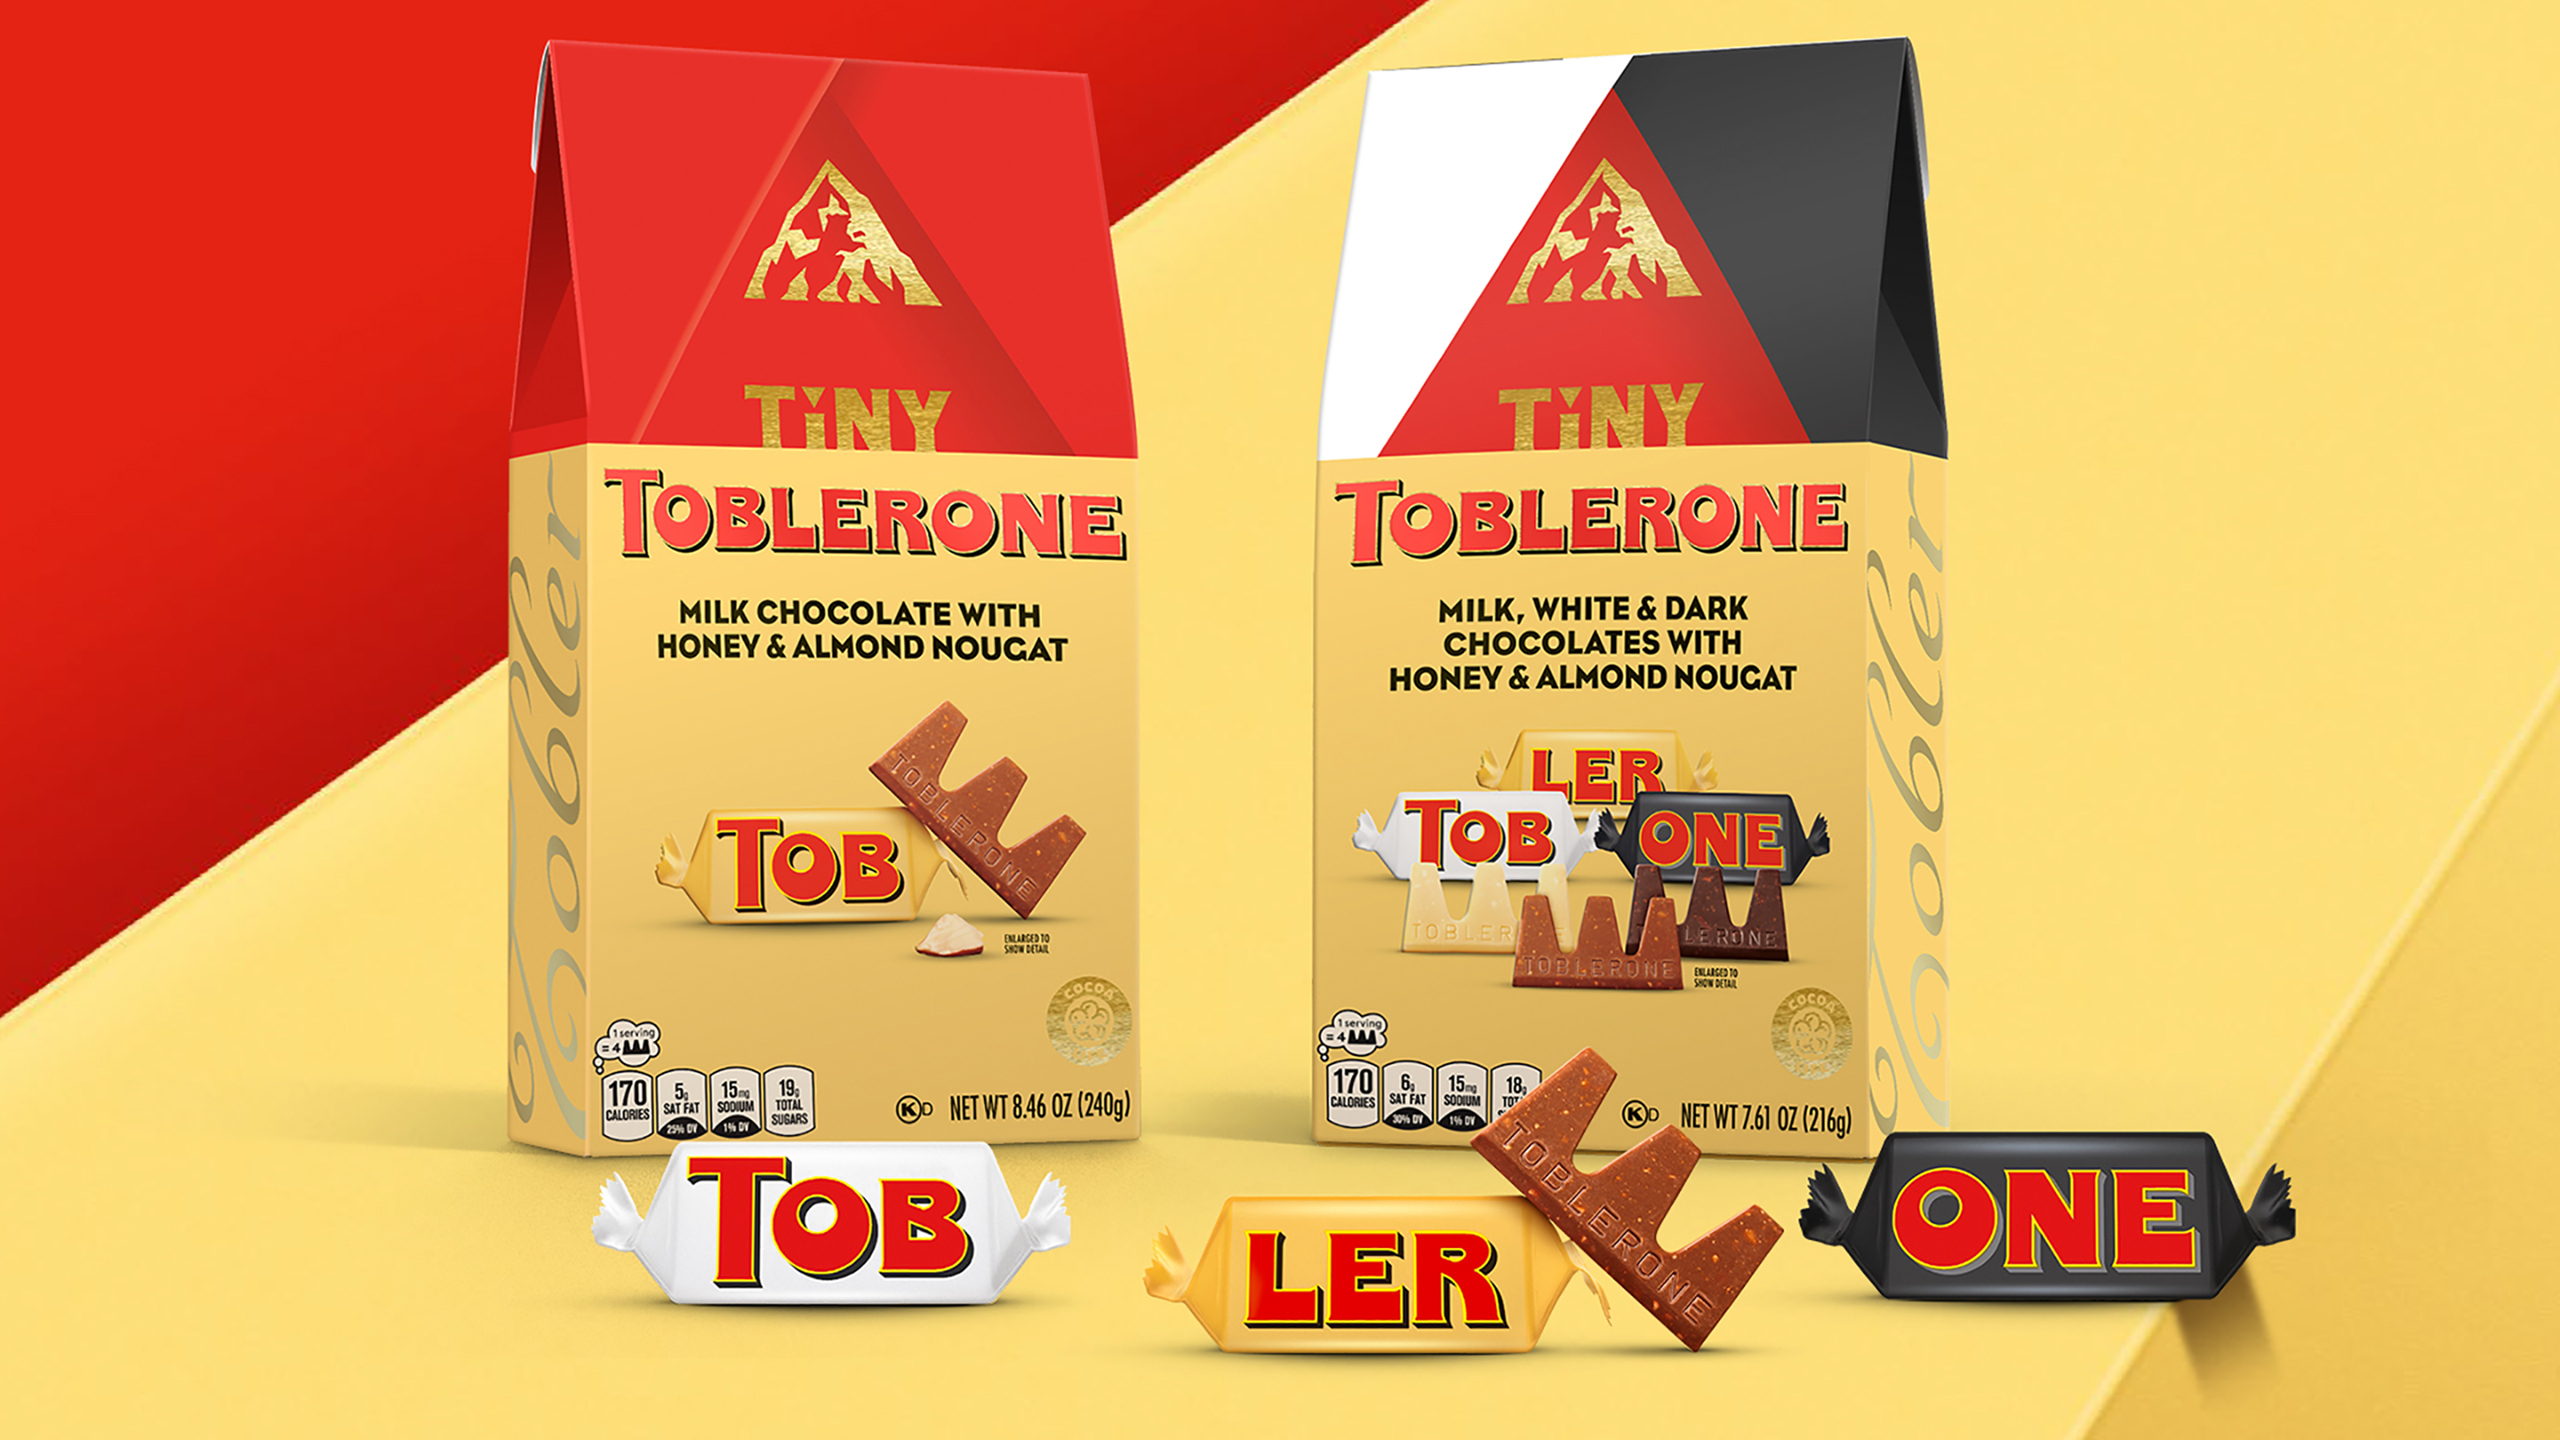 Toblerone chocolate to make a major change from 2023. Read here to